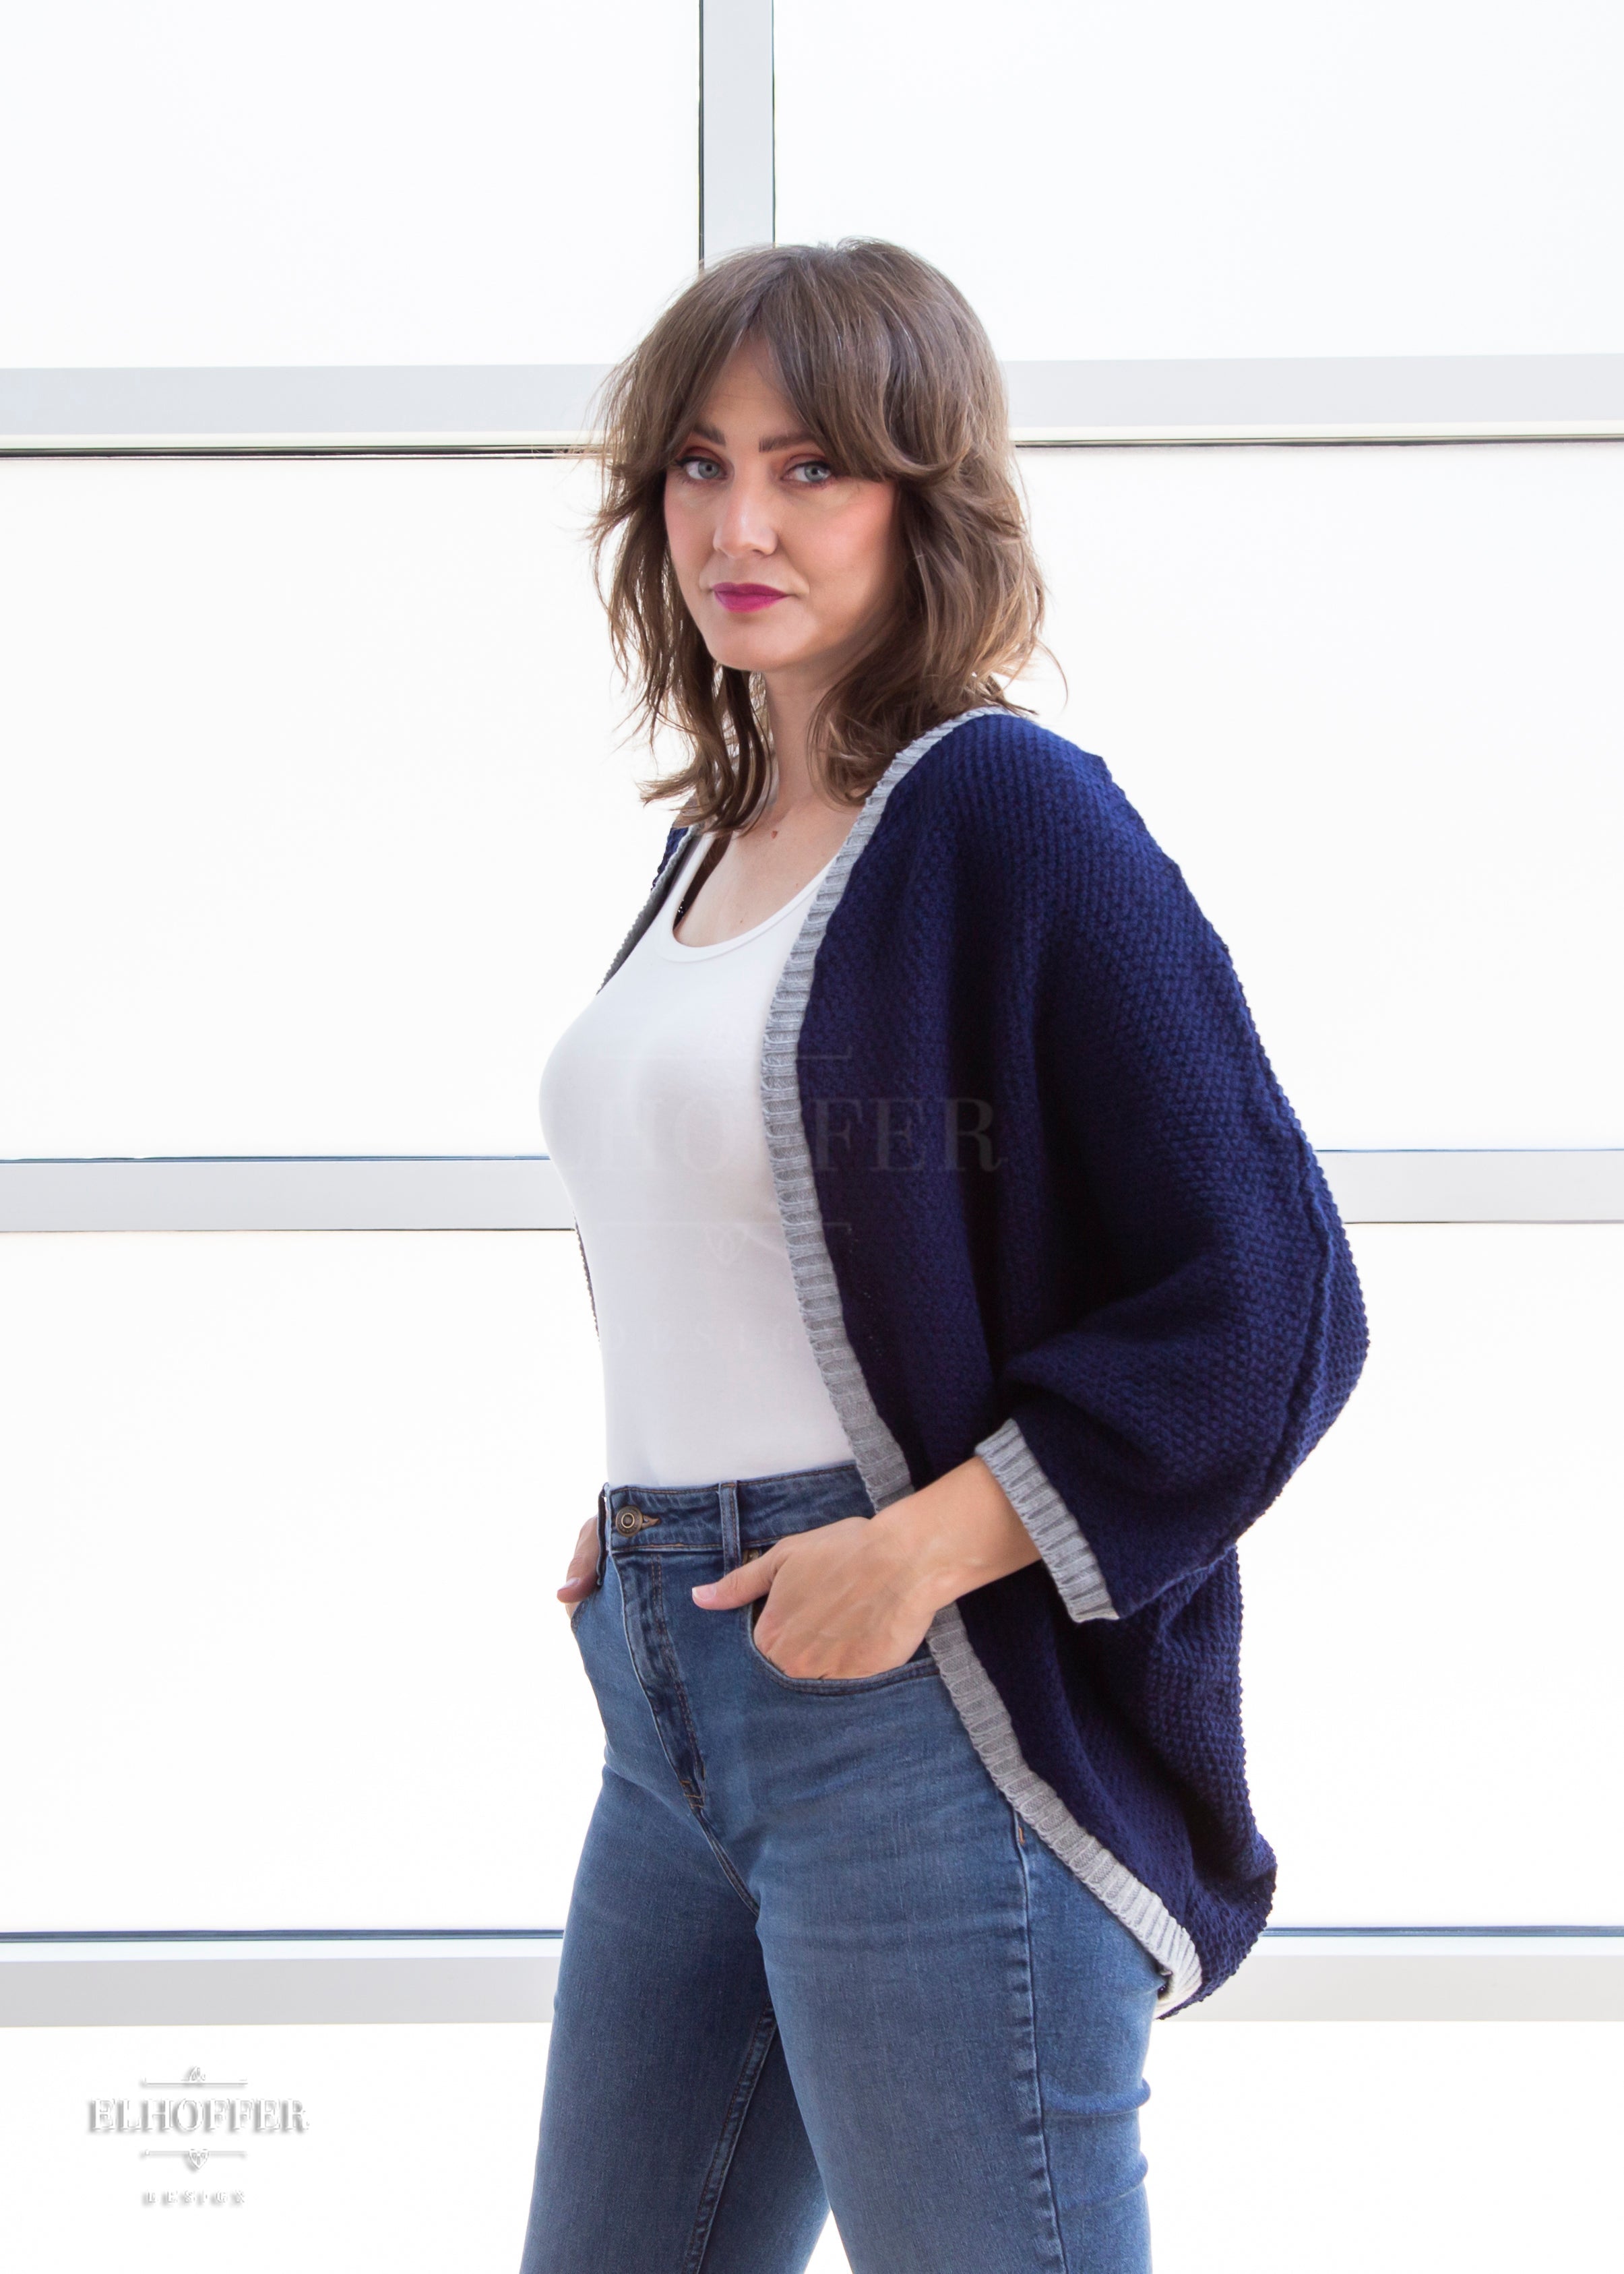 Ashley, a sun kissed skin M model with shoulder length feathered brown hair, is wearing a dark blue loose knit dolman with light grey ribbing around edges and cuffs. The dolman features 3/4 length sleeves and a magical script design (circle with T crossing through the circle) on the back.